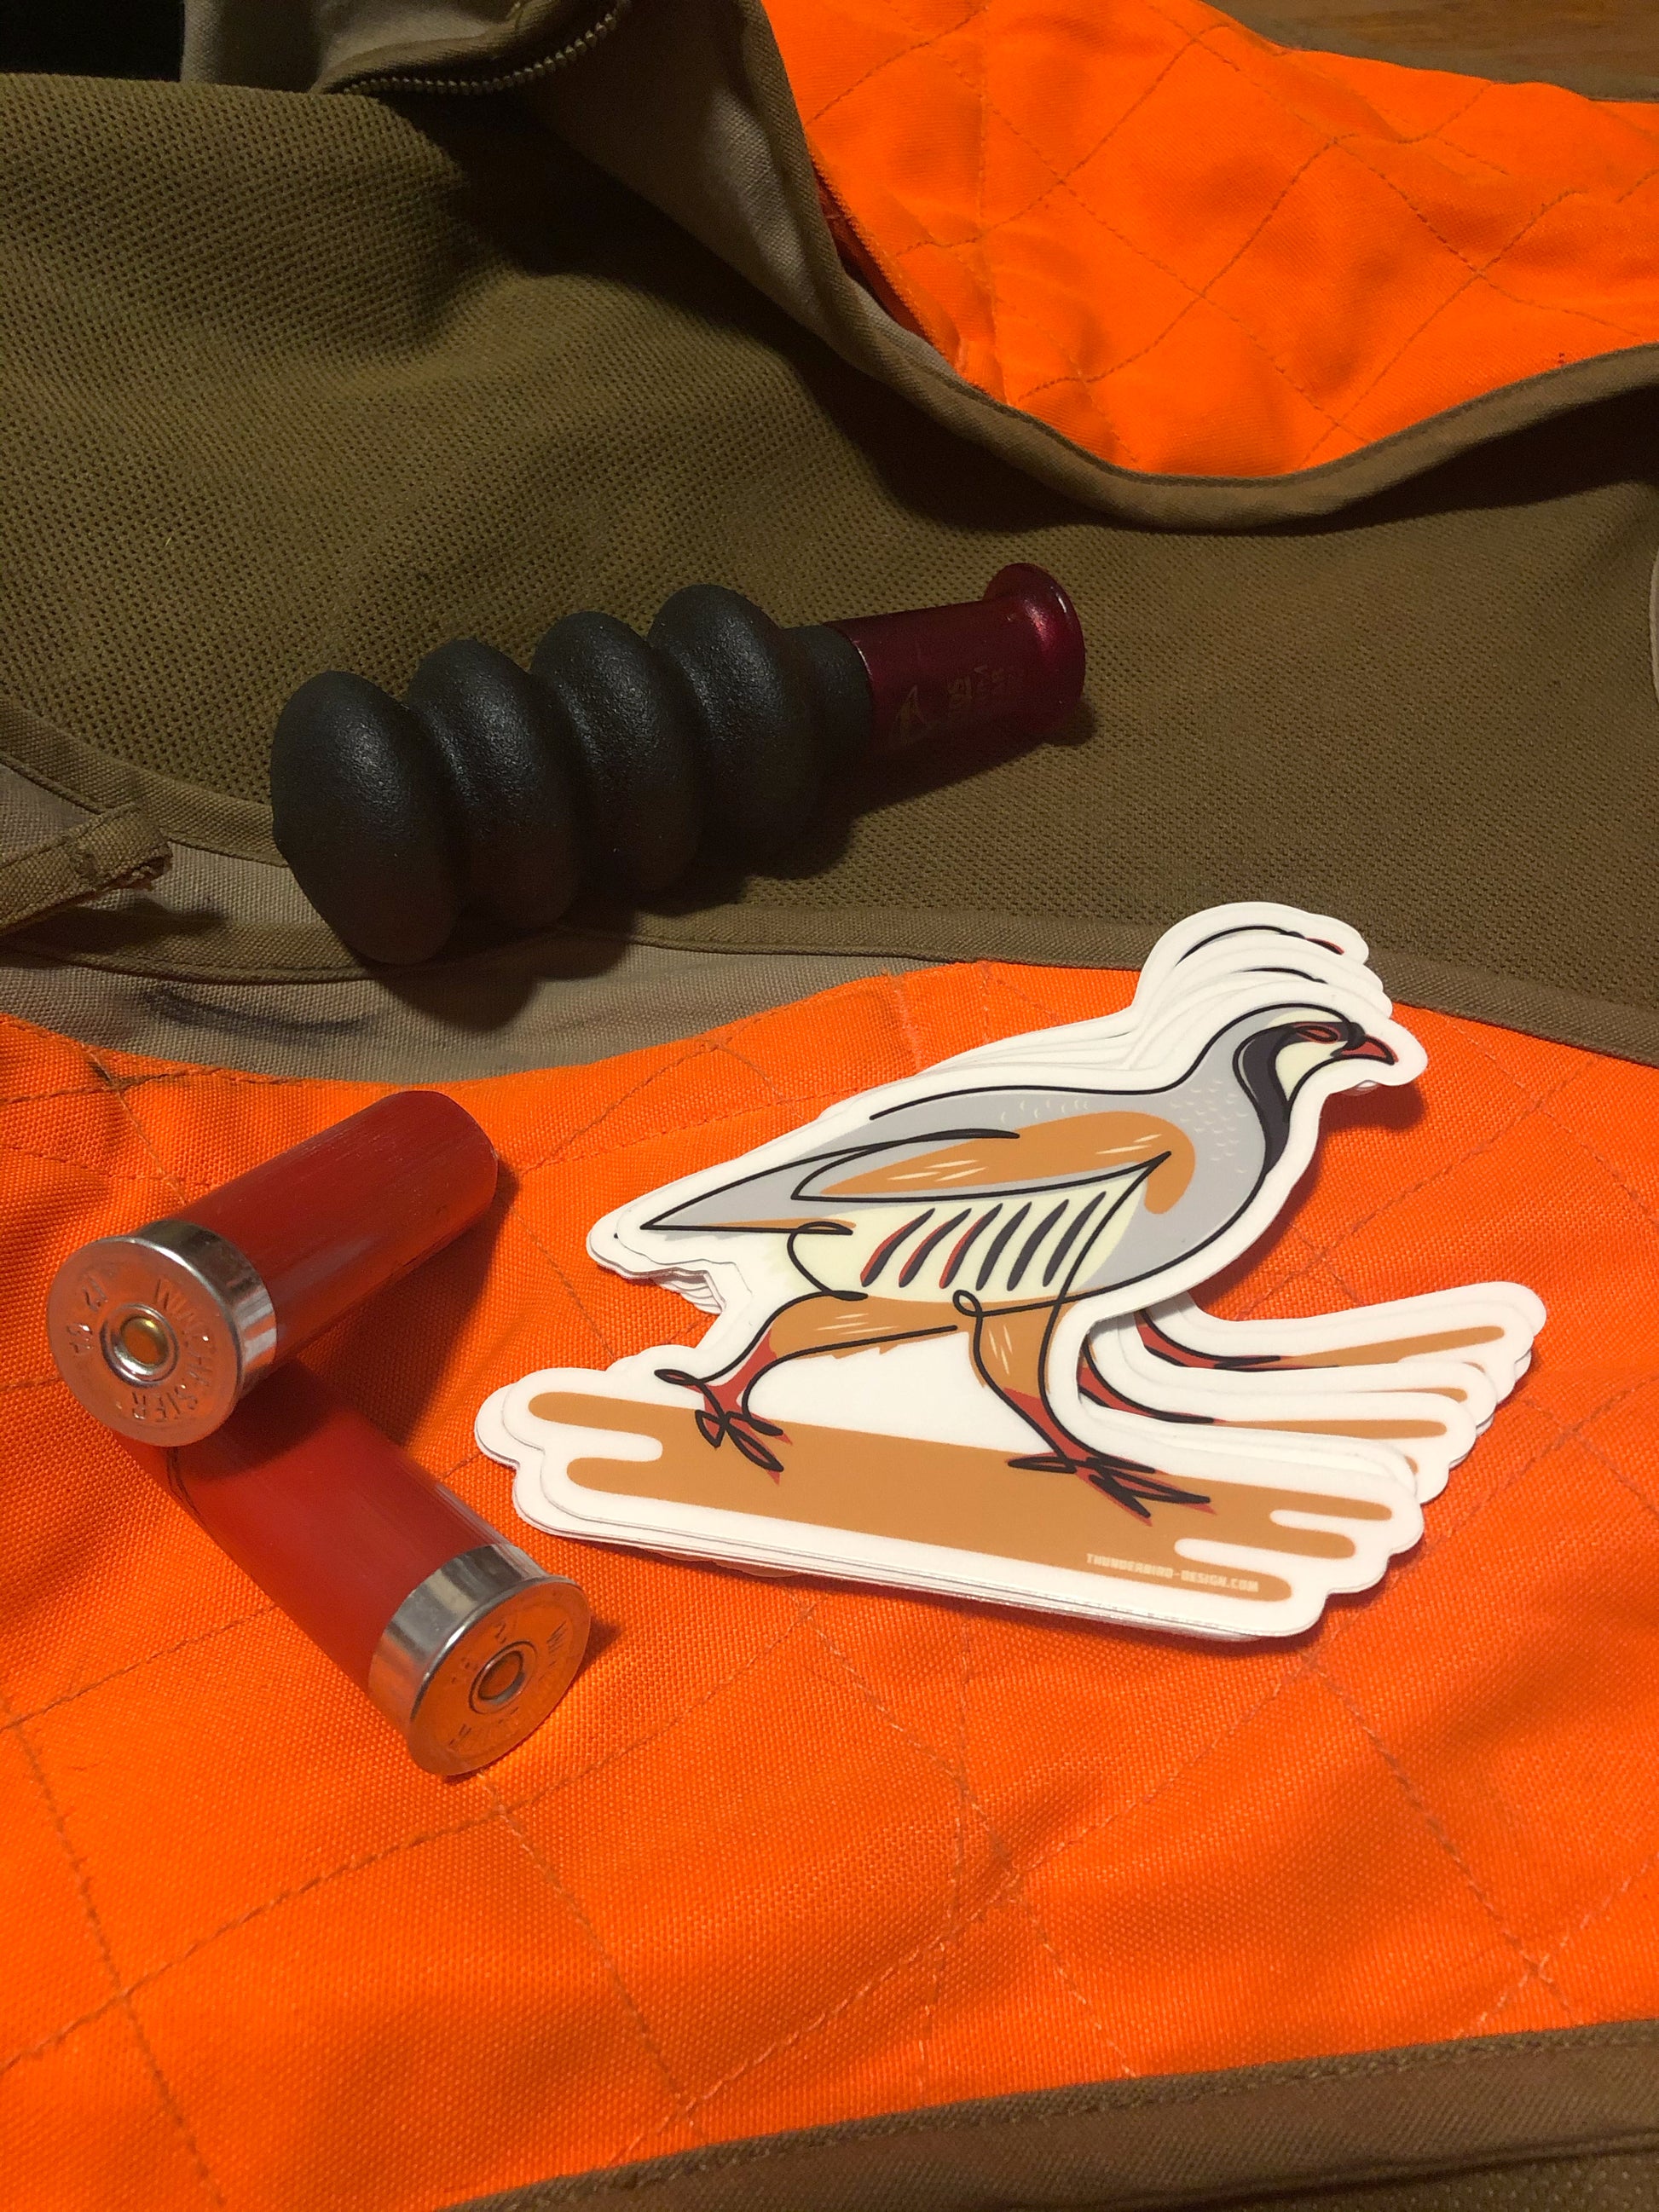 Thunderbird Outdoor SupplyChukar Upland Bird - Single Line Transfer Decal w/ Matte FinishChukar Upland Bird - Single Line Transfer Decal
4" Single Line Chukar. 
Matte Weatherproof Vinyl Decal.Place one on your case, cooler, crate, bumper, water-bottle, or anything else you can think of.
10% of all pr